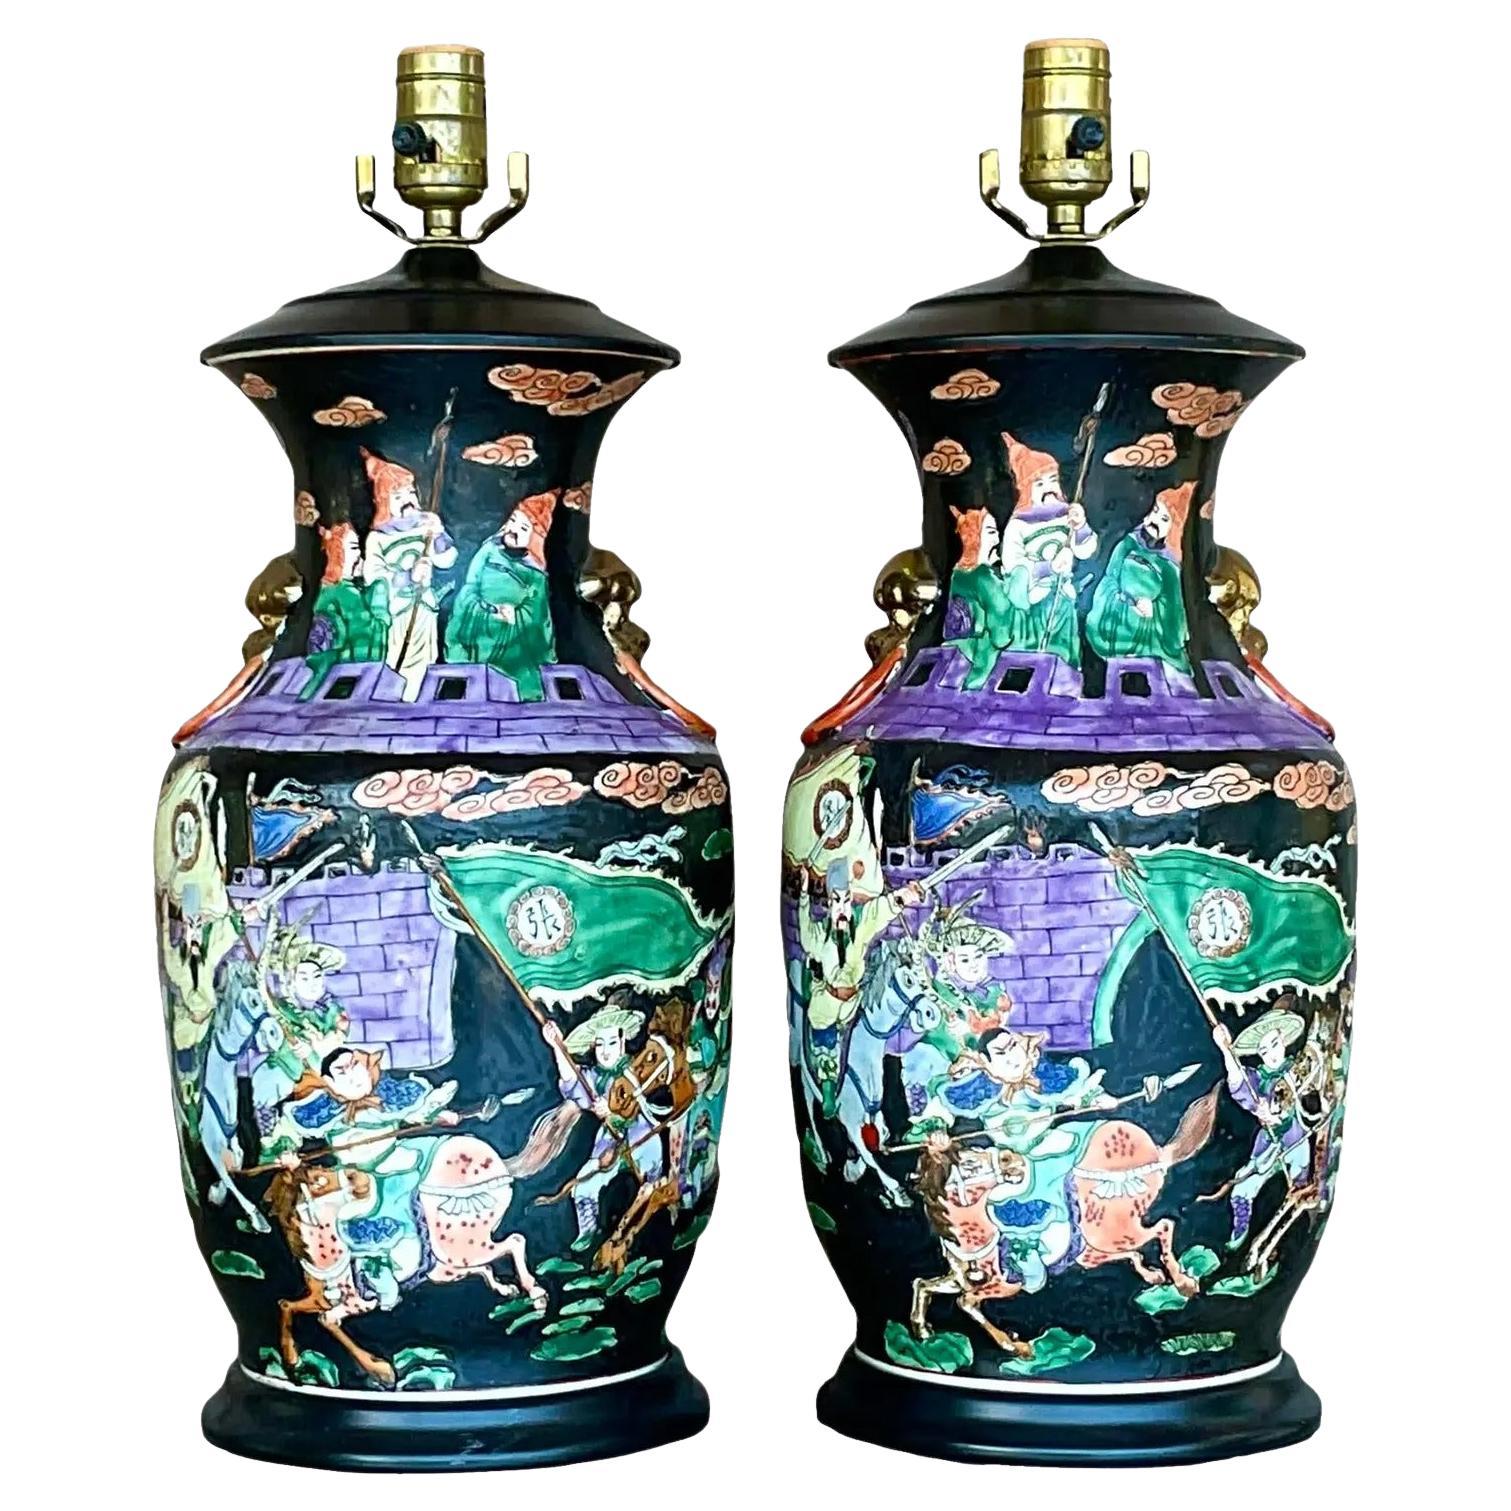 Vintage Asian Jewel Tone Chinoiserie Ceramic Lamps - a Pair For Sale